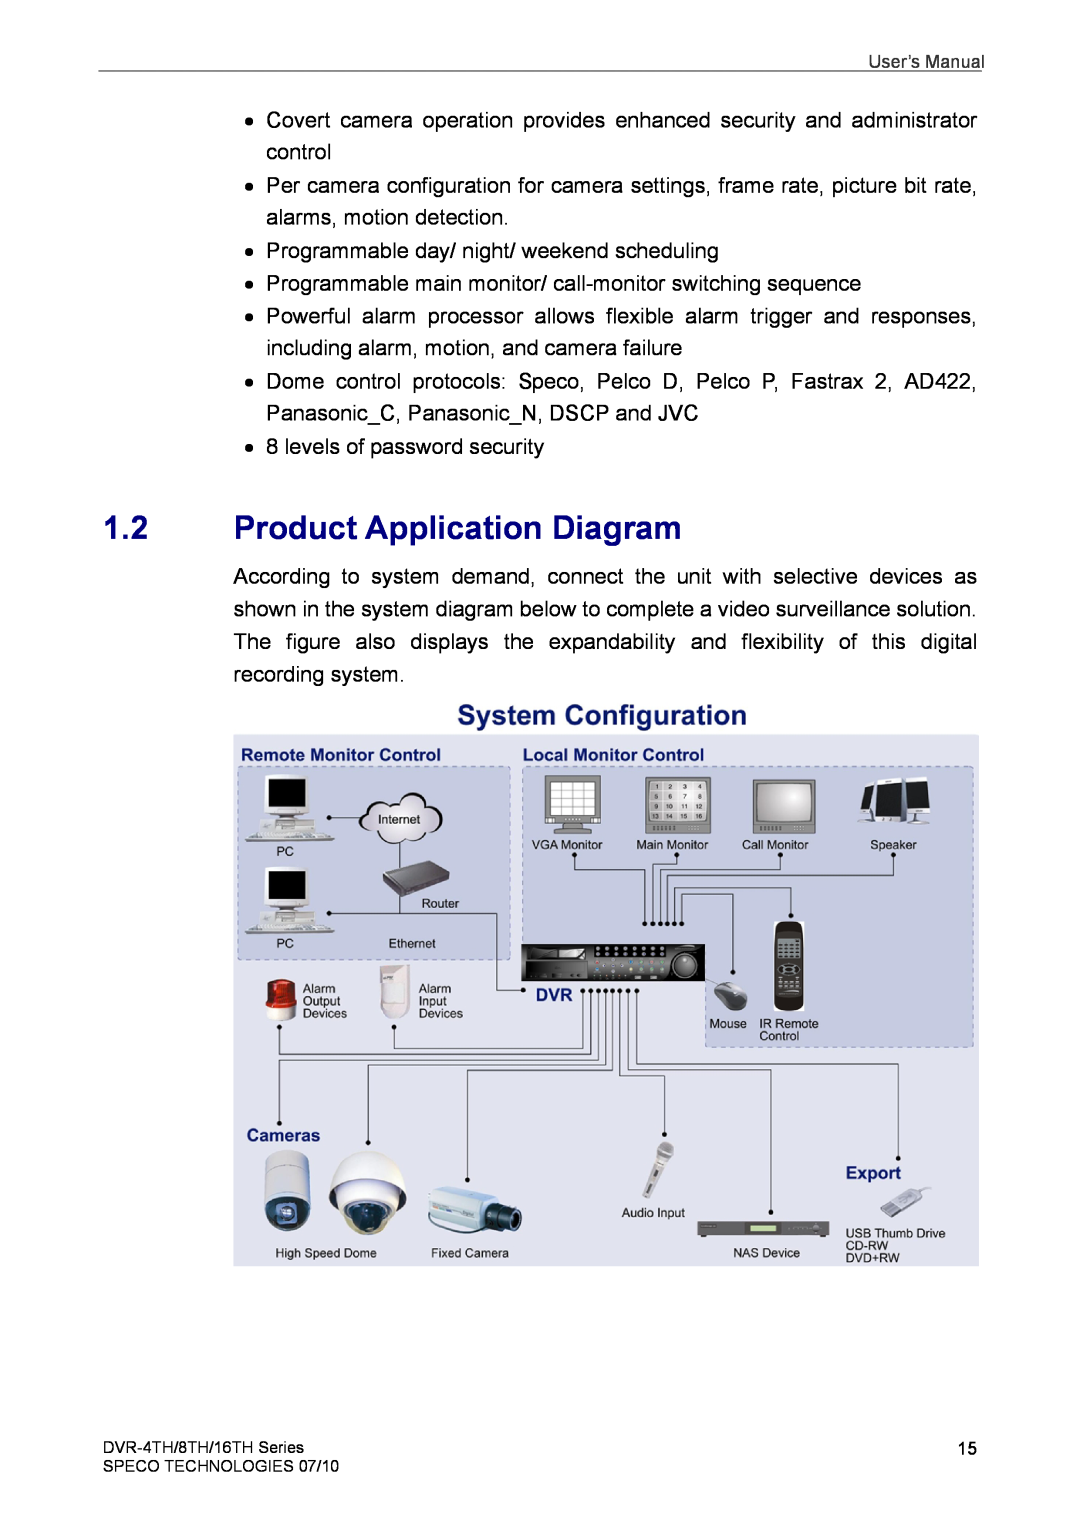 Speco Technologies 4TH, 8TH, 16TH user manual Product Application Diagram 